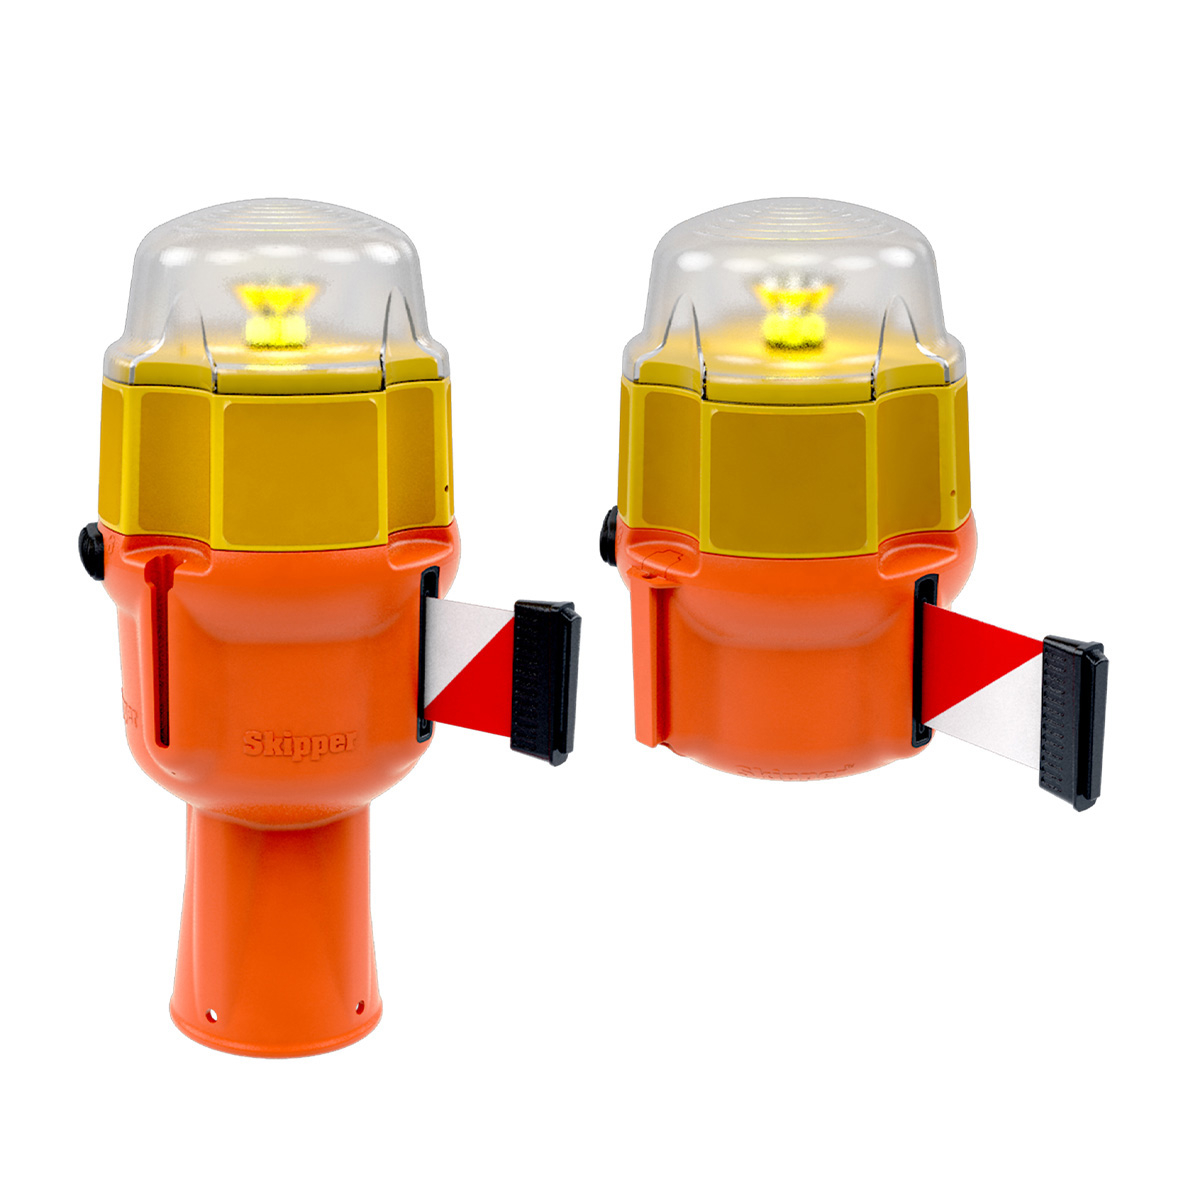 Skipper Rechargeable Safety Light For Use With Skipper And Skipper XS Units 